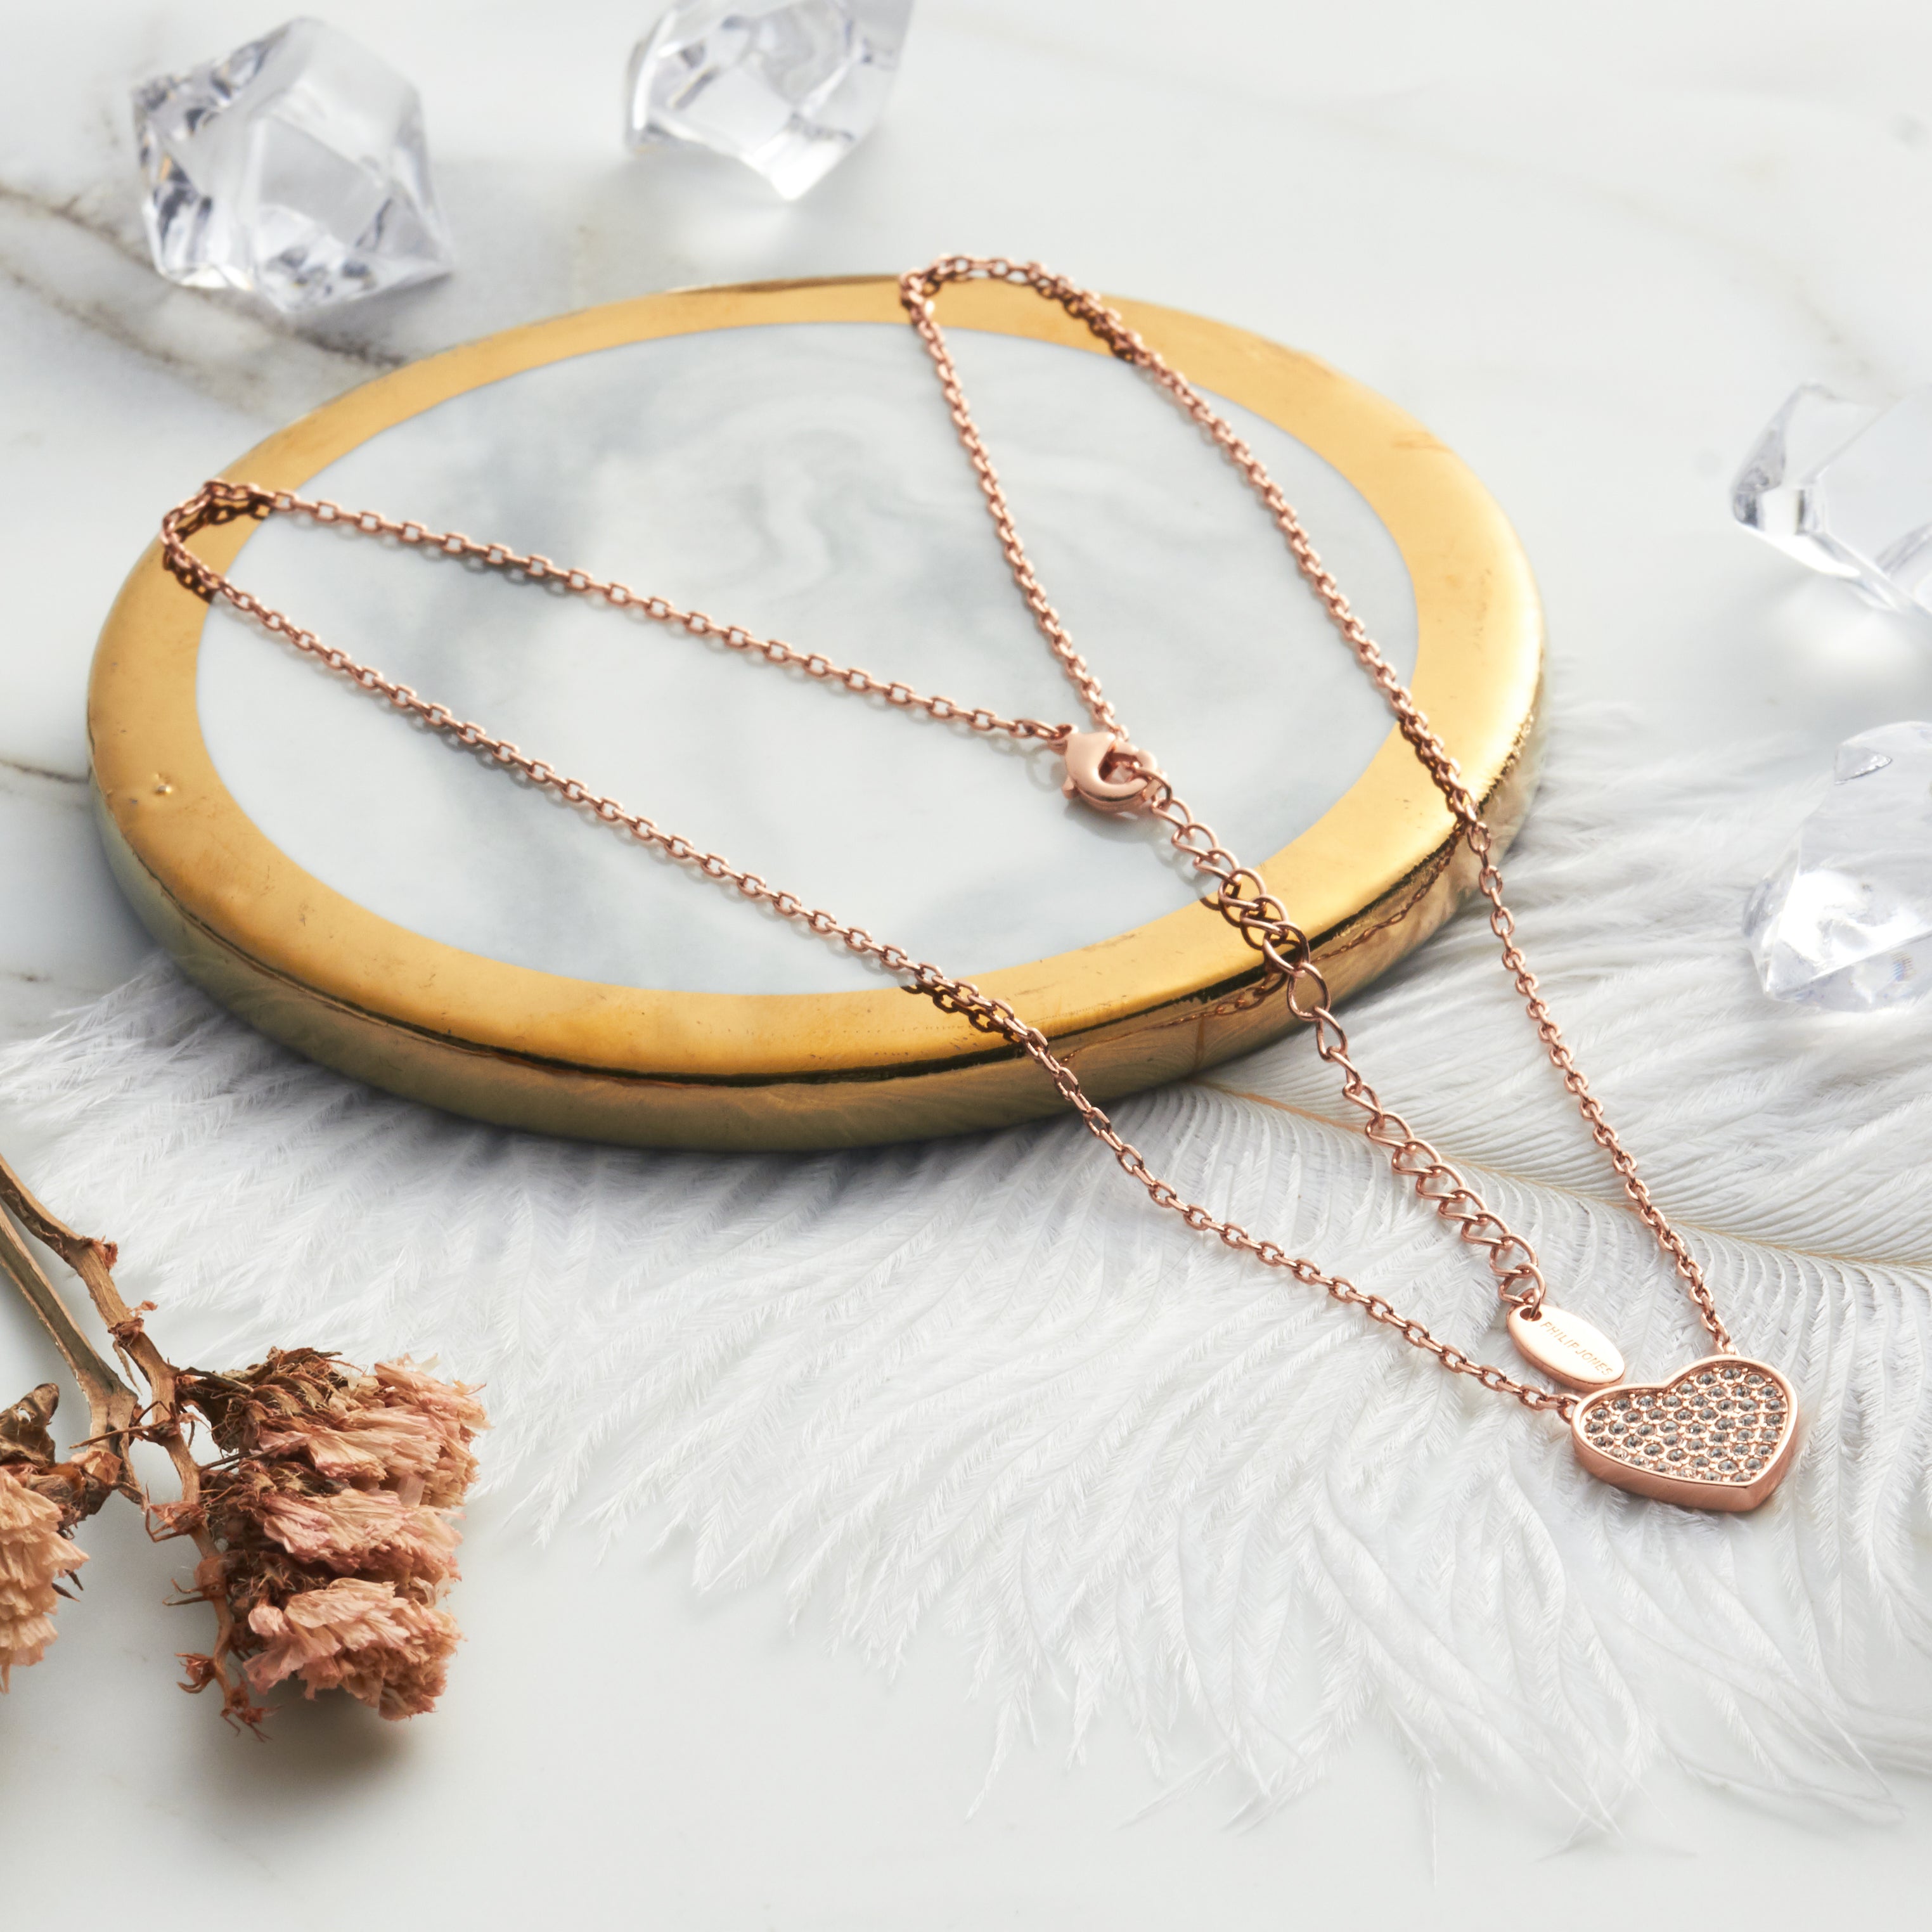 Rose Gold Plated Pave Heart Necklace Created with Zircondia® Crystals